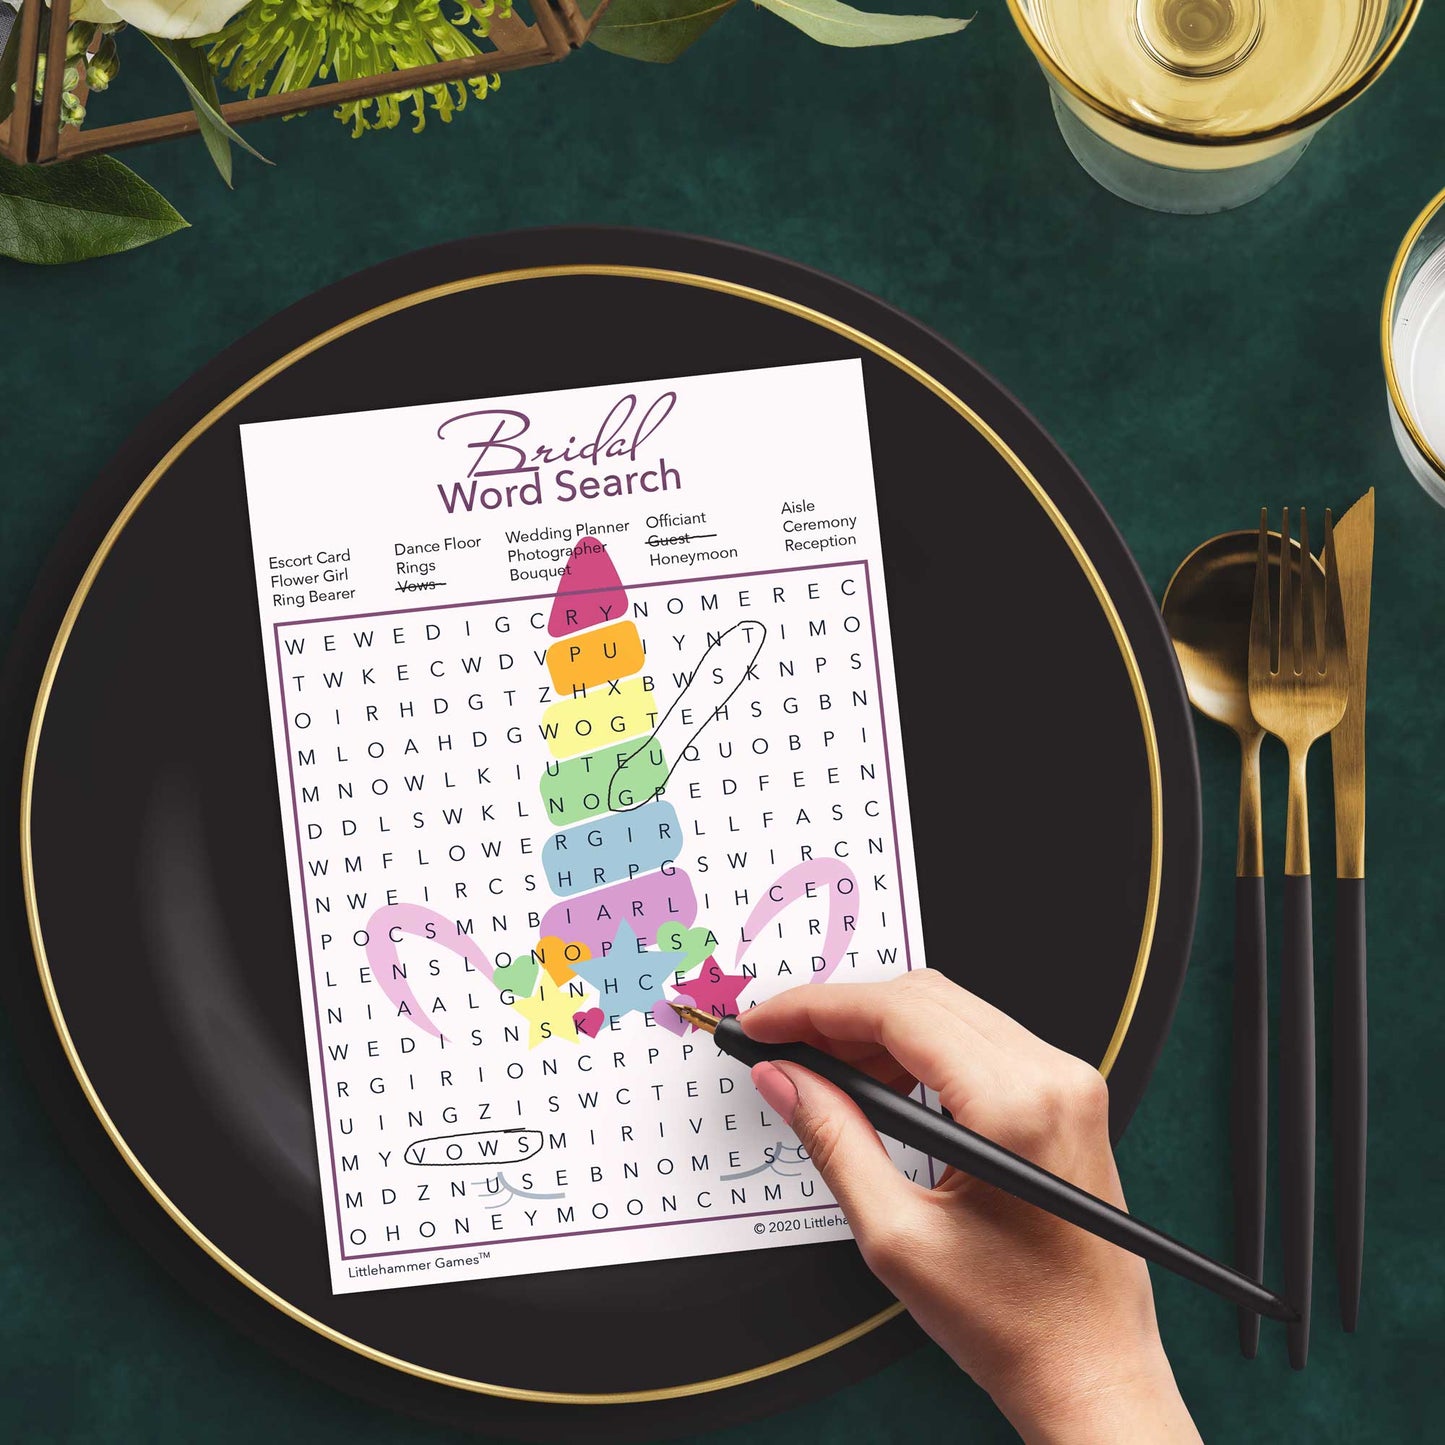 Woman with a pen playing a unicorn Bridal Word Search game card at a dark place setting